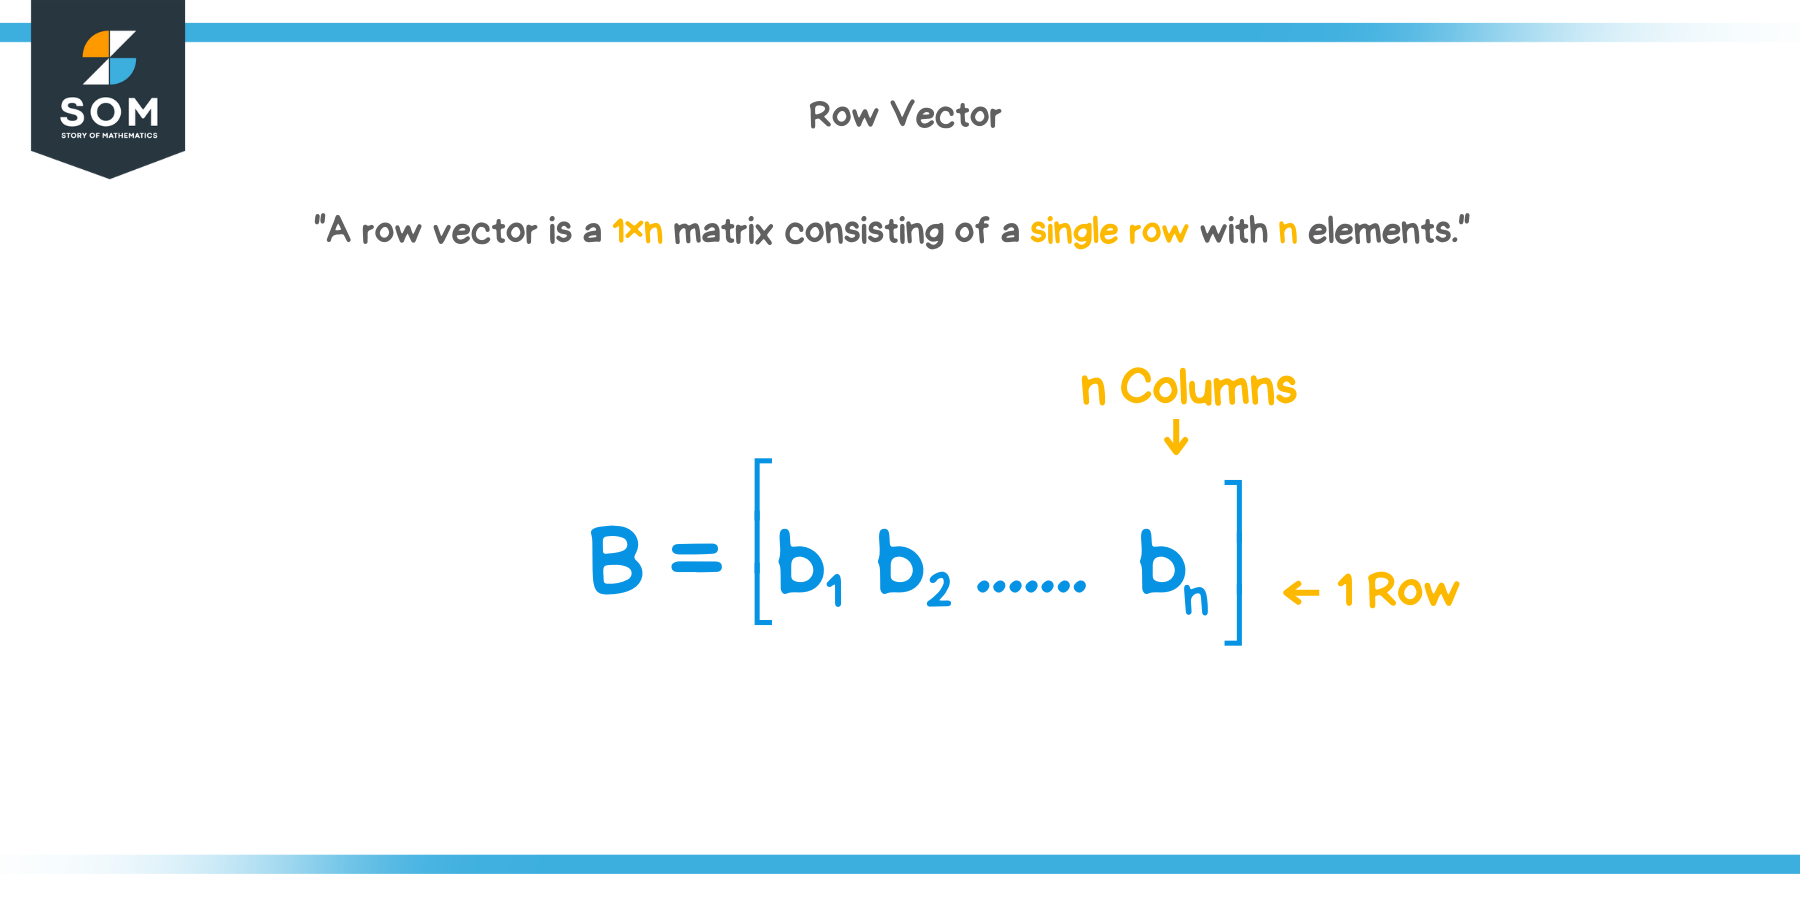 What is a Row Vector?